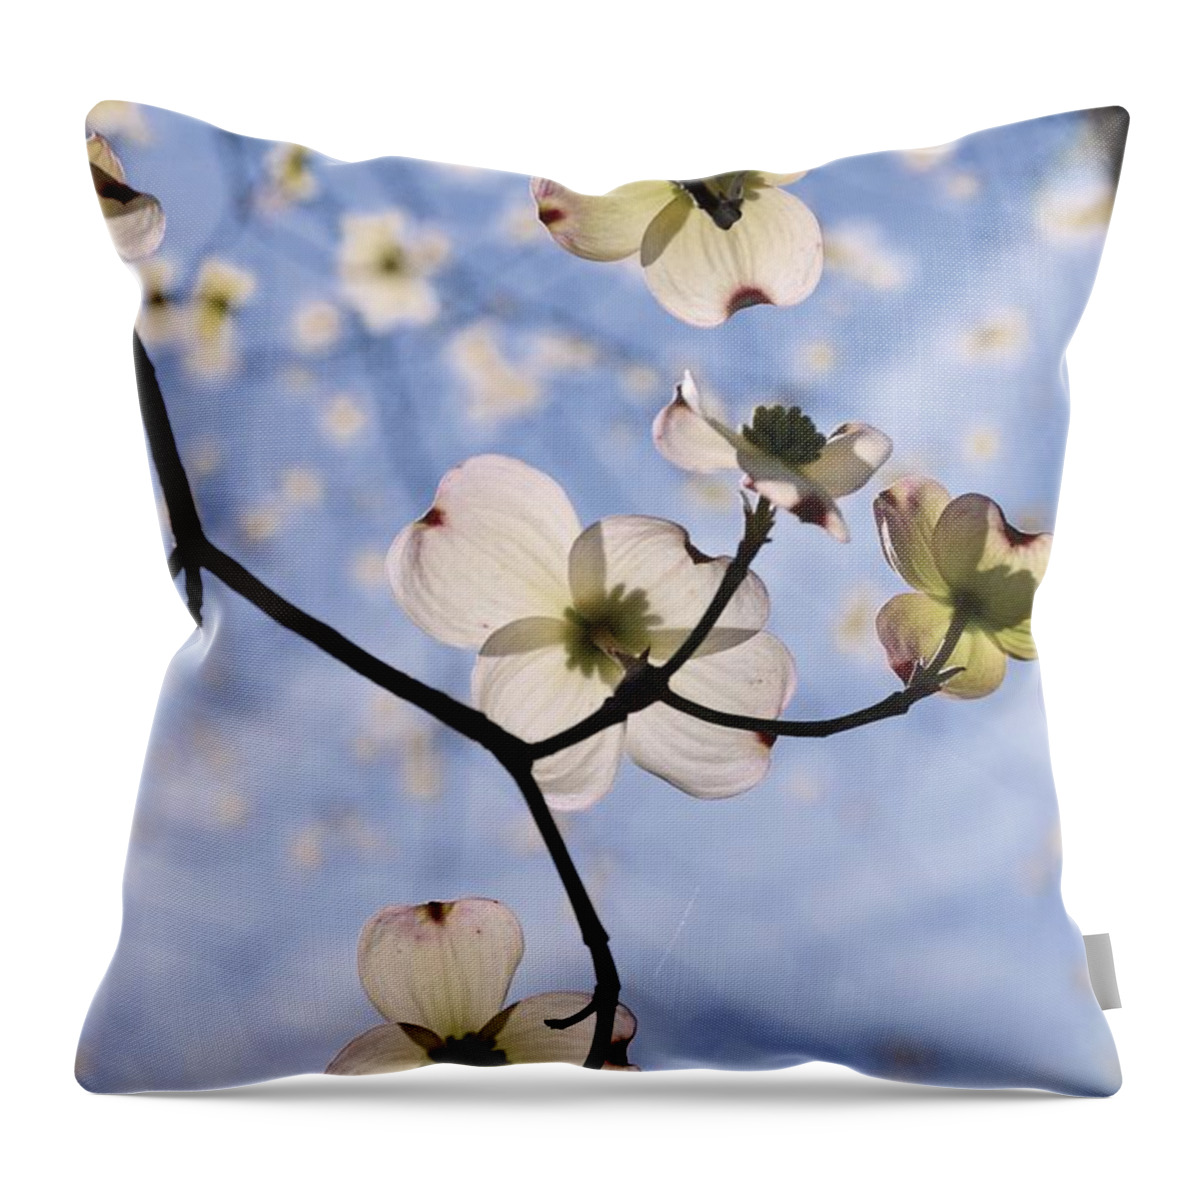 Spring Blossoms In The Sky Throw Pillow featuring the photograph Spring Blossoms In The Sky by Lisa Wooten